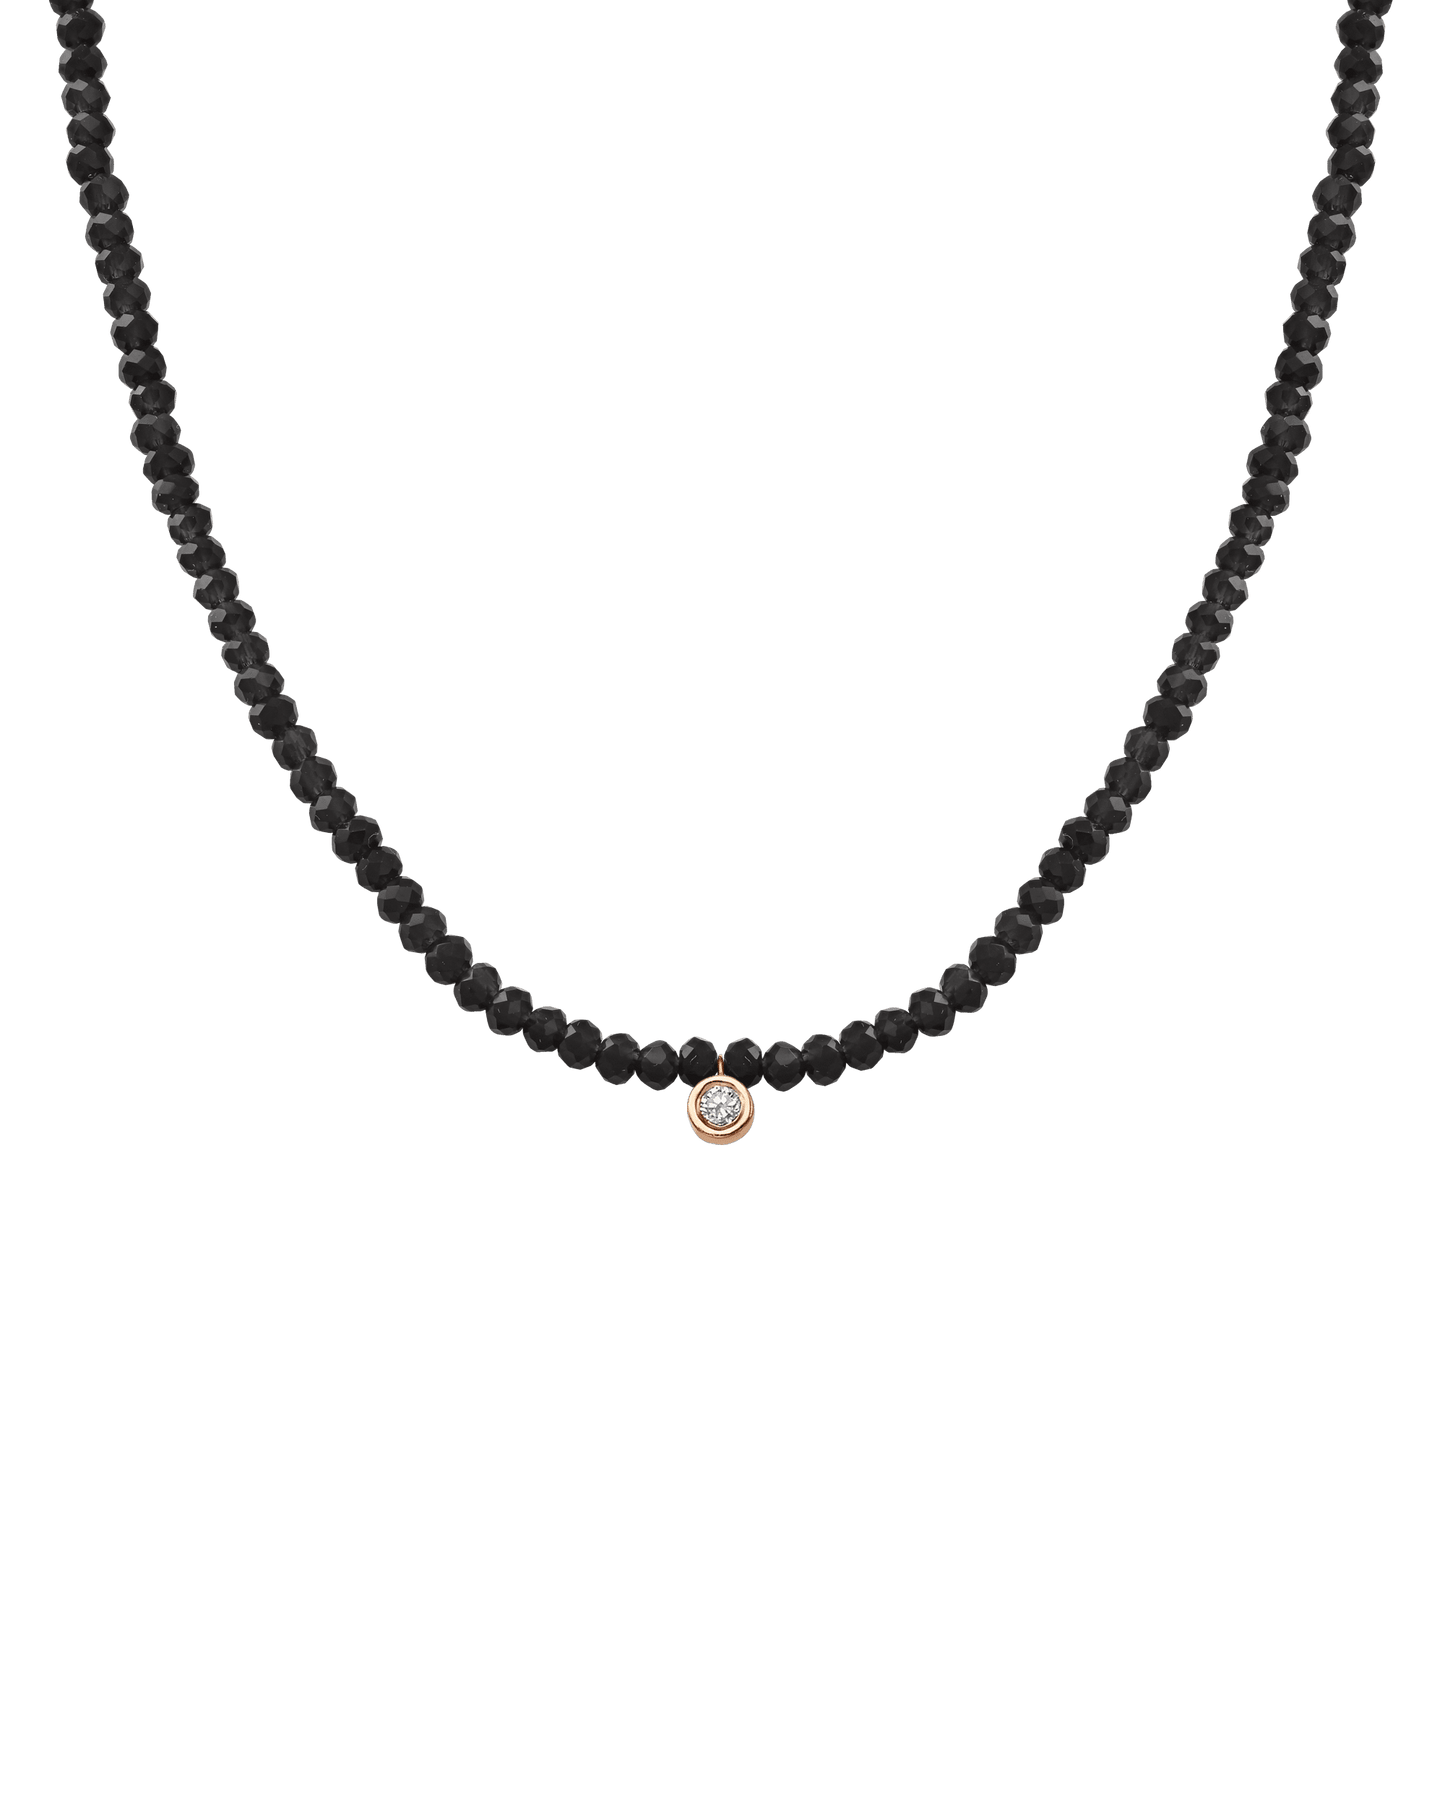 The Gemstone & Diamond Necklace - 14K Rose Gold Necklaces 14K Solid Gold Glass Beads Black Spinnel Medium: 0.04ct 14"